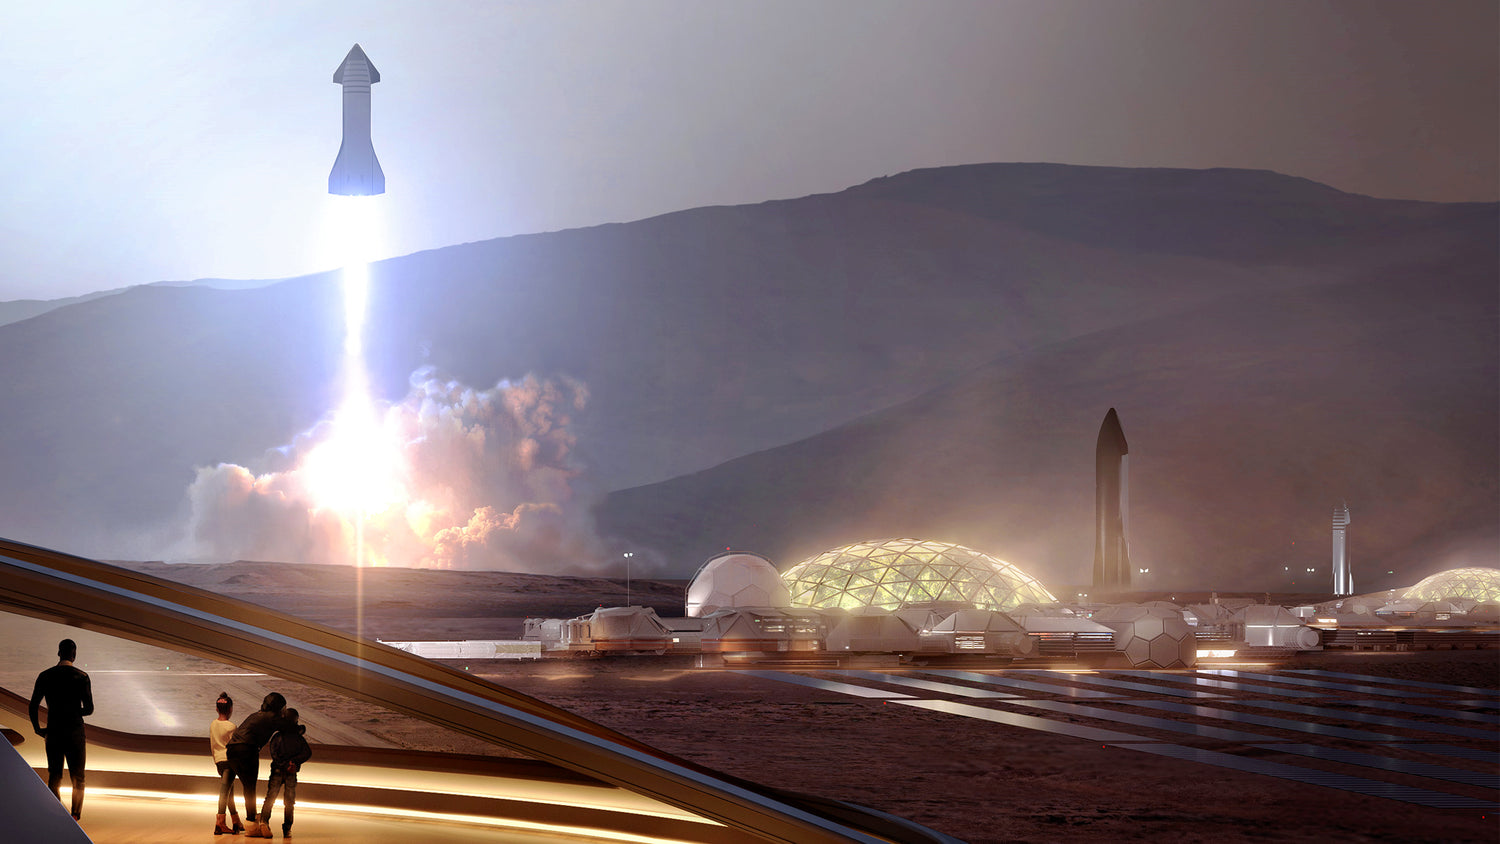 Elon Musk Founded SpaceX To Make Humans A Multi-Planet Species, 'Build A City On Mars'